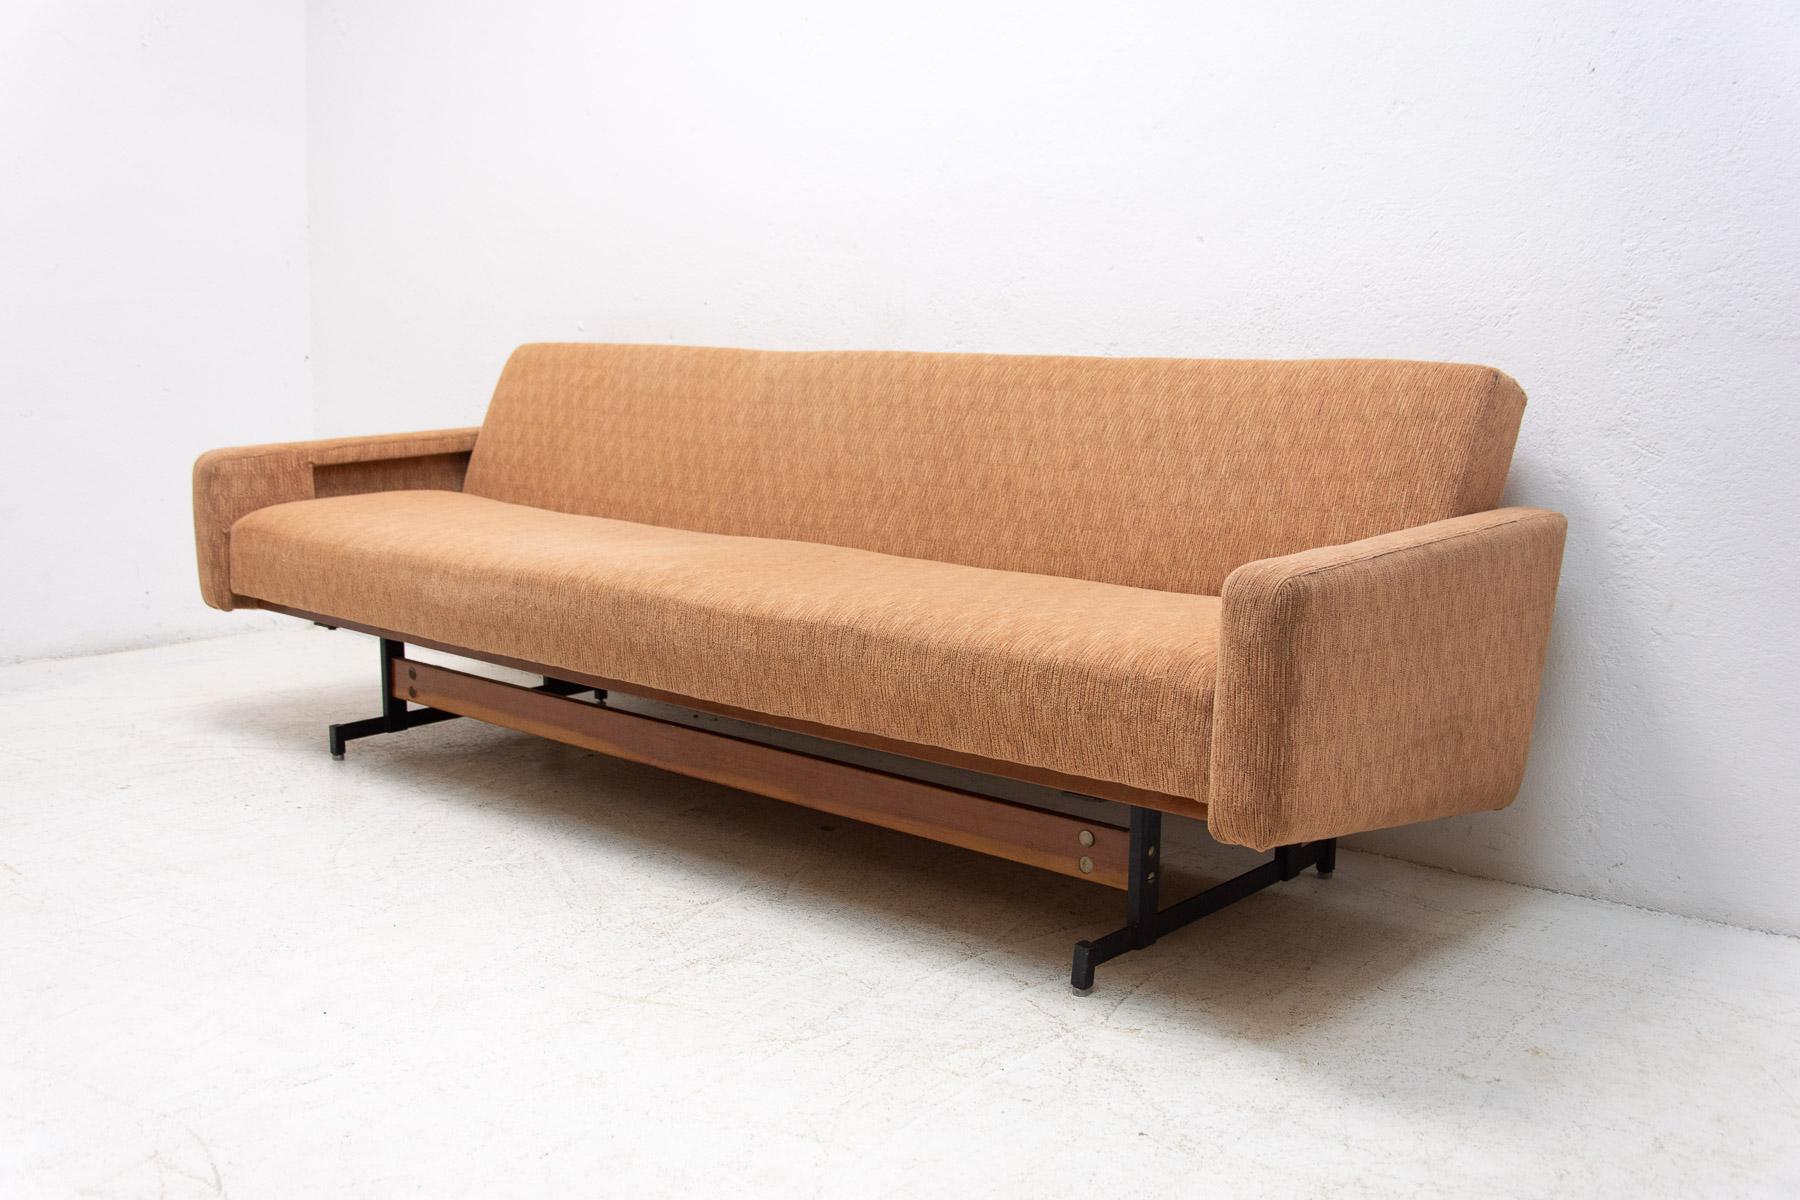 Mid century sofa bed, made in the former Czechoslovakia in the 1970´s. This sofa has a wooden and iron structure, is in good preserved condition, the upholstery shows signs of age and using.

Lenght:     214 cm

Height:     70 cm
Depth:      73